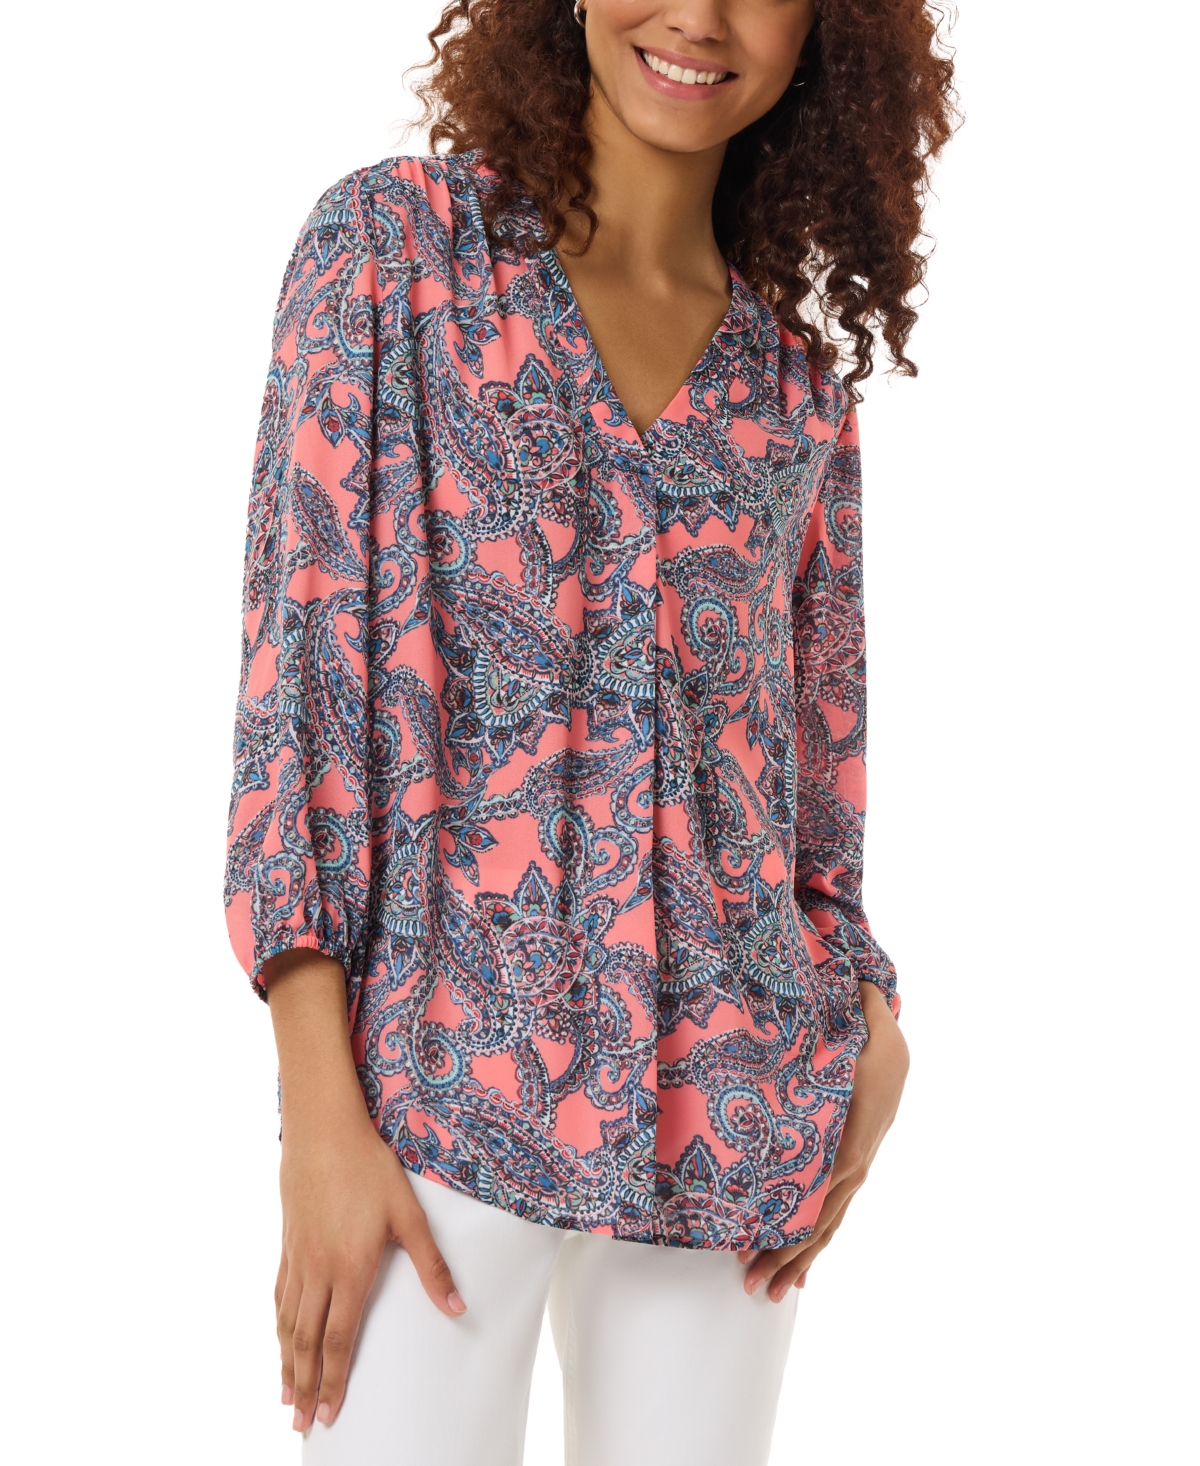 Women's Printed V-Neck 3/4-Sleeve Top - Coral Sun